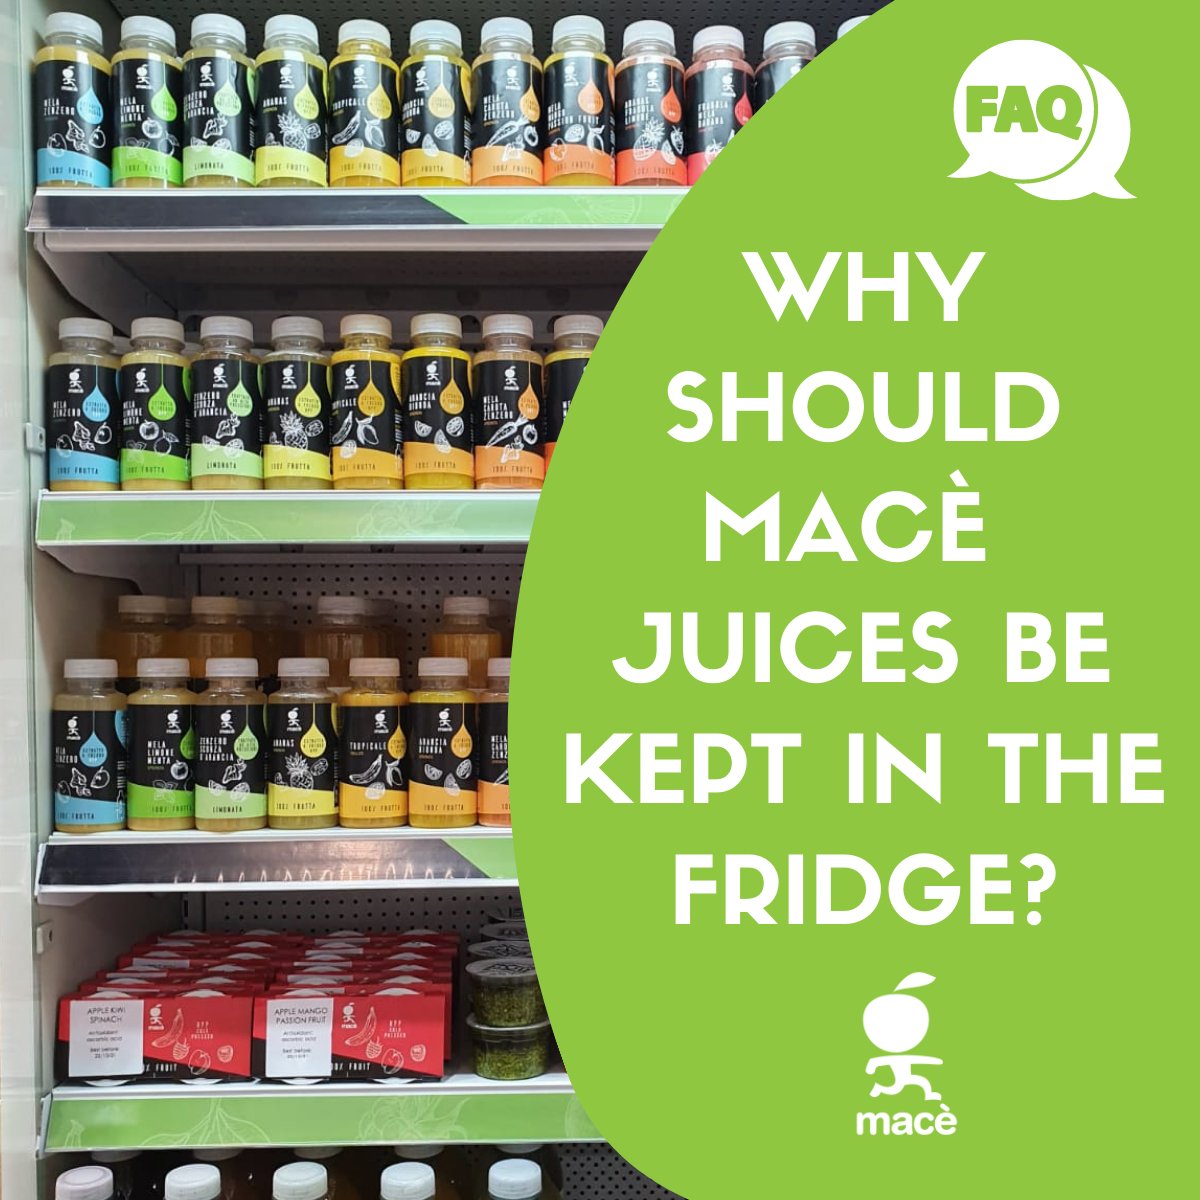 Why should Mac juices be kept in the fridge?